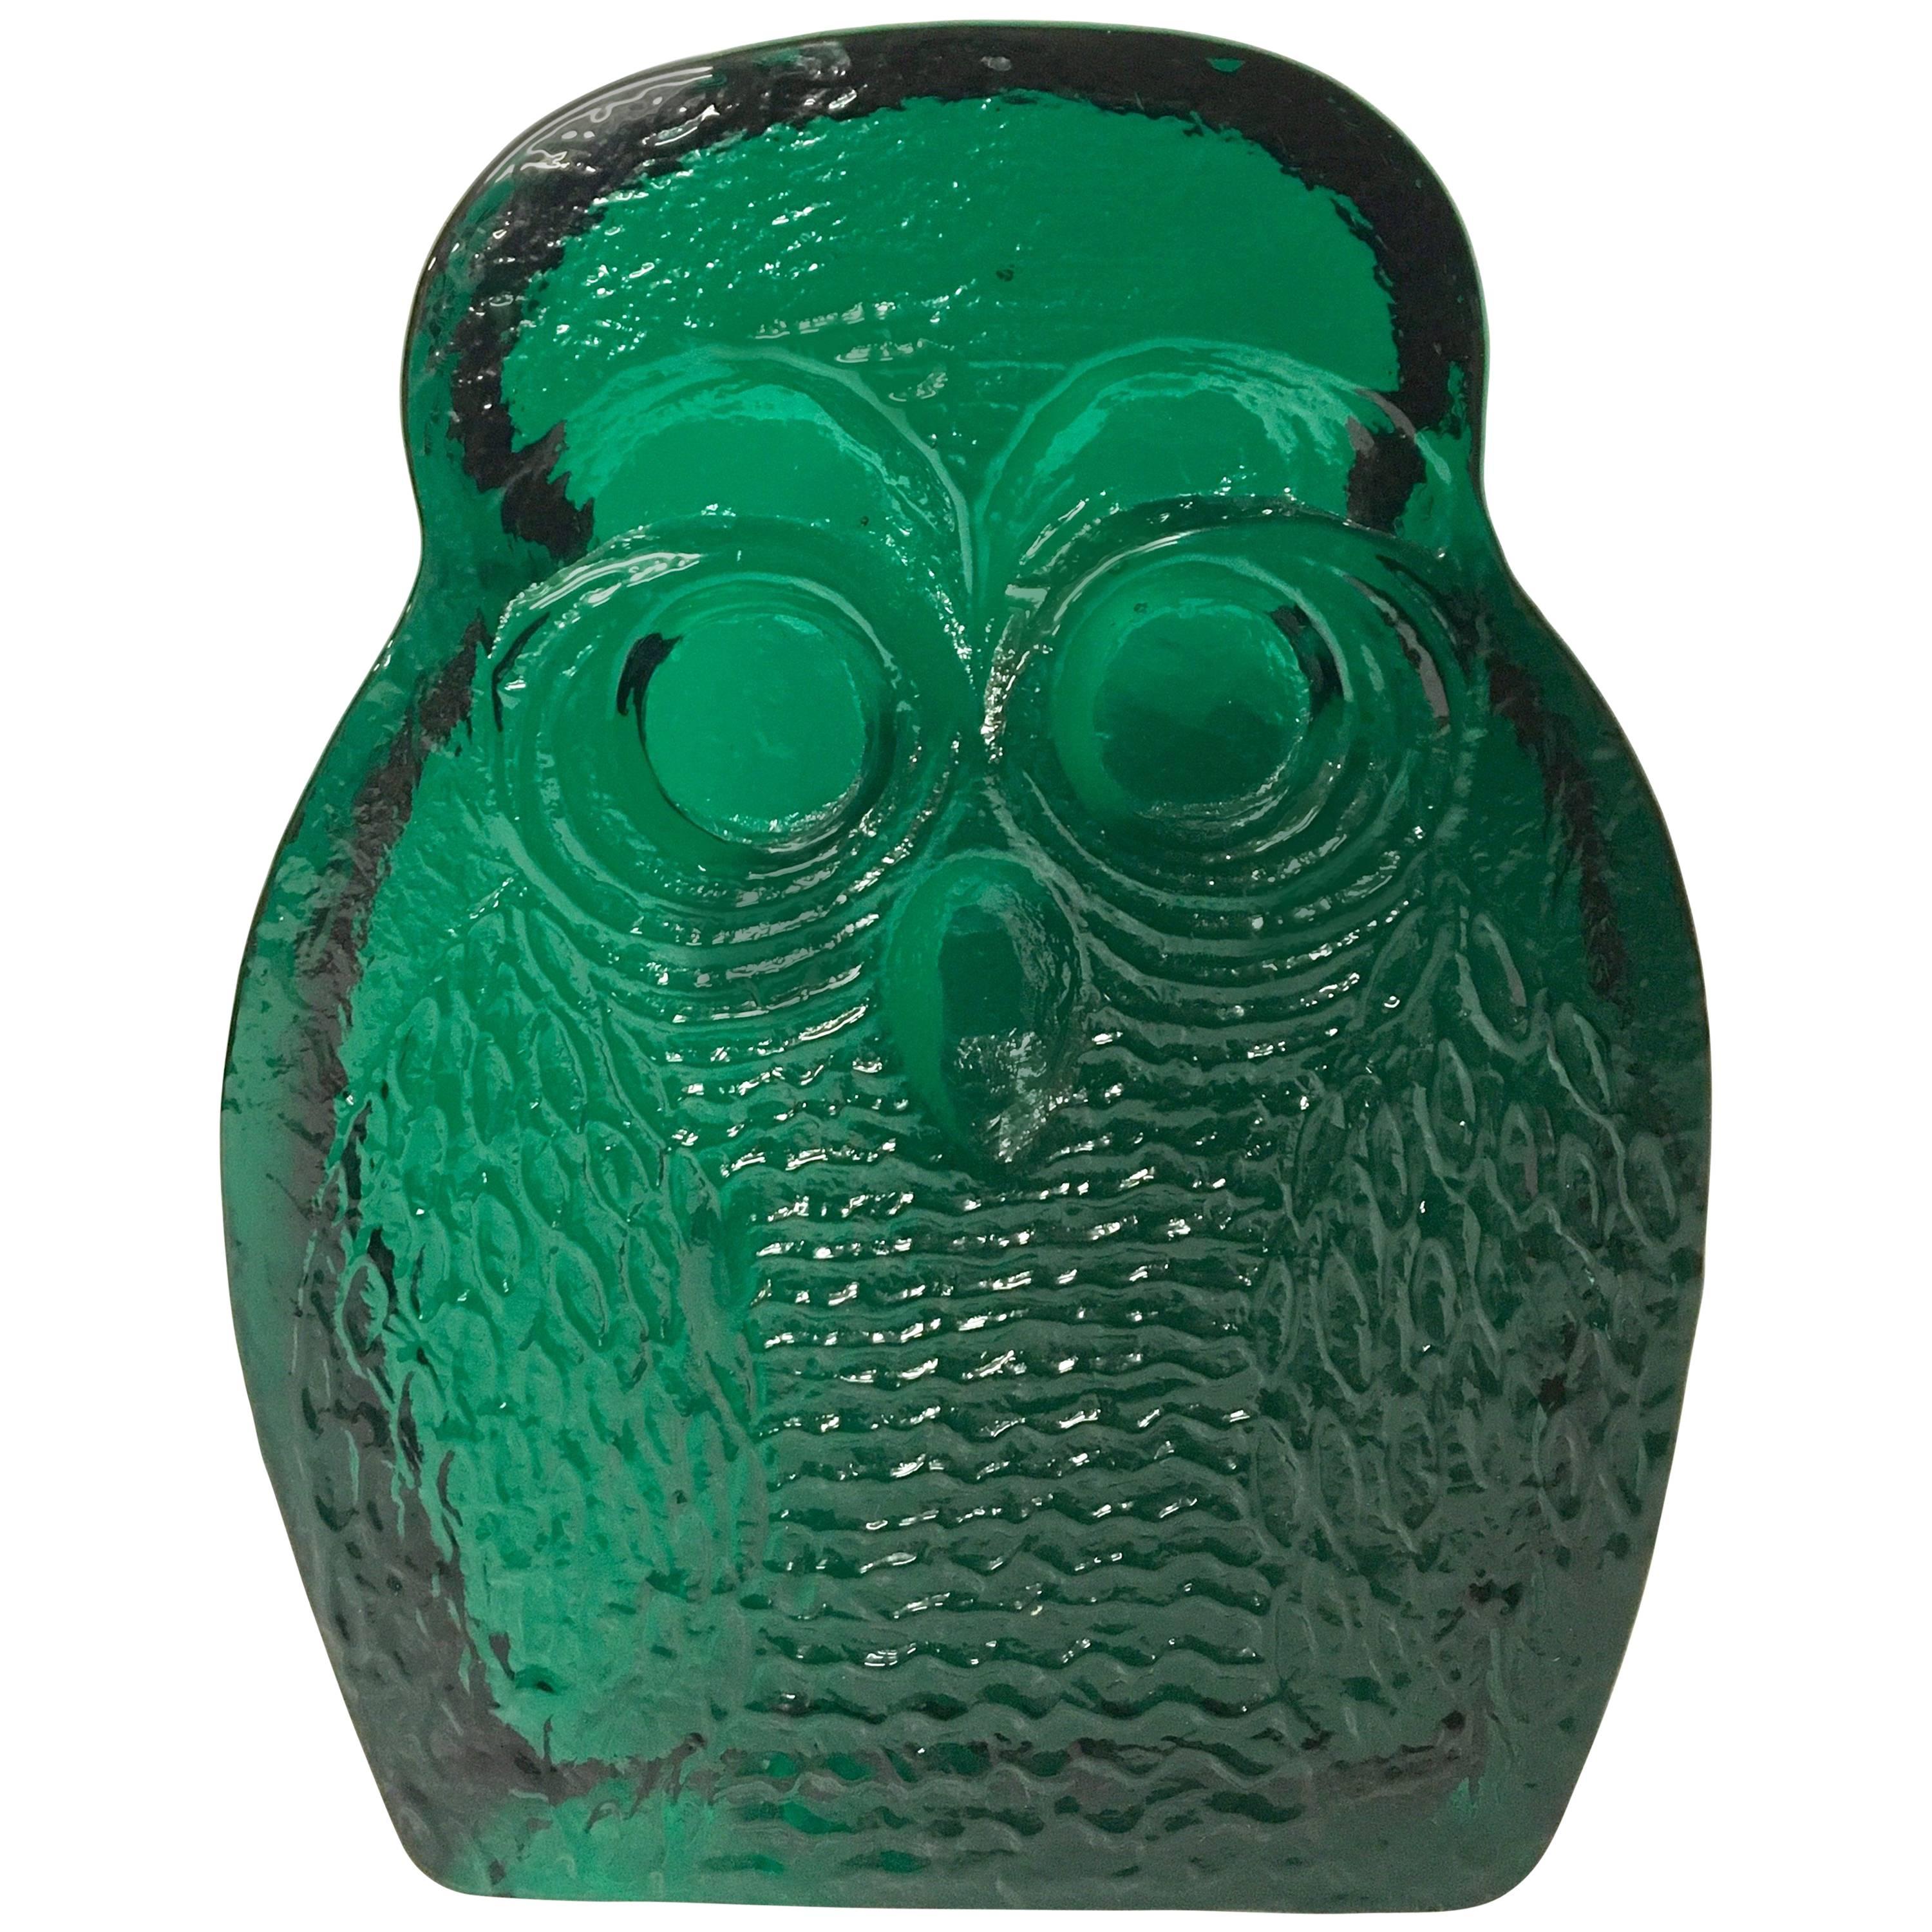 Whimsical Emerald Green Glass Owl Bookend or Paperweight by Blenko